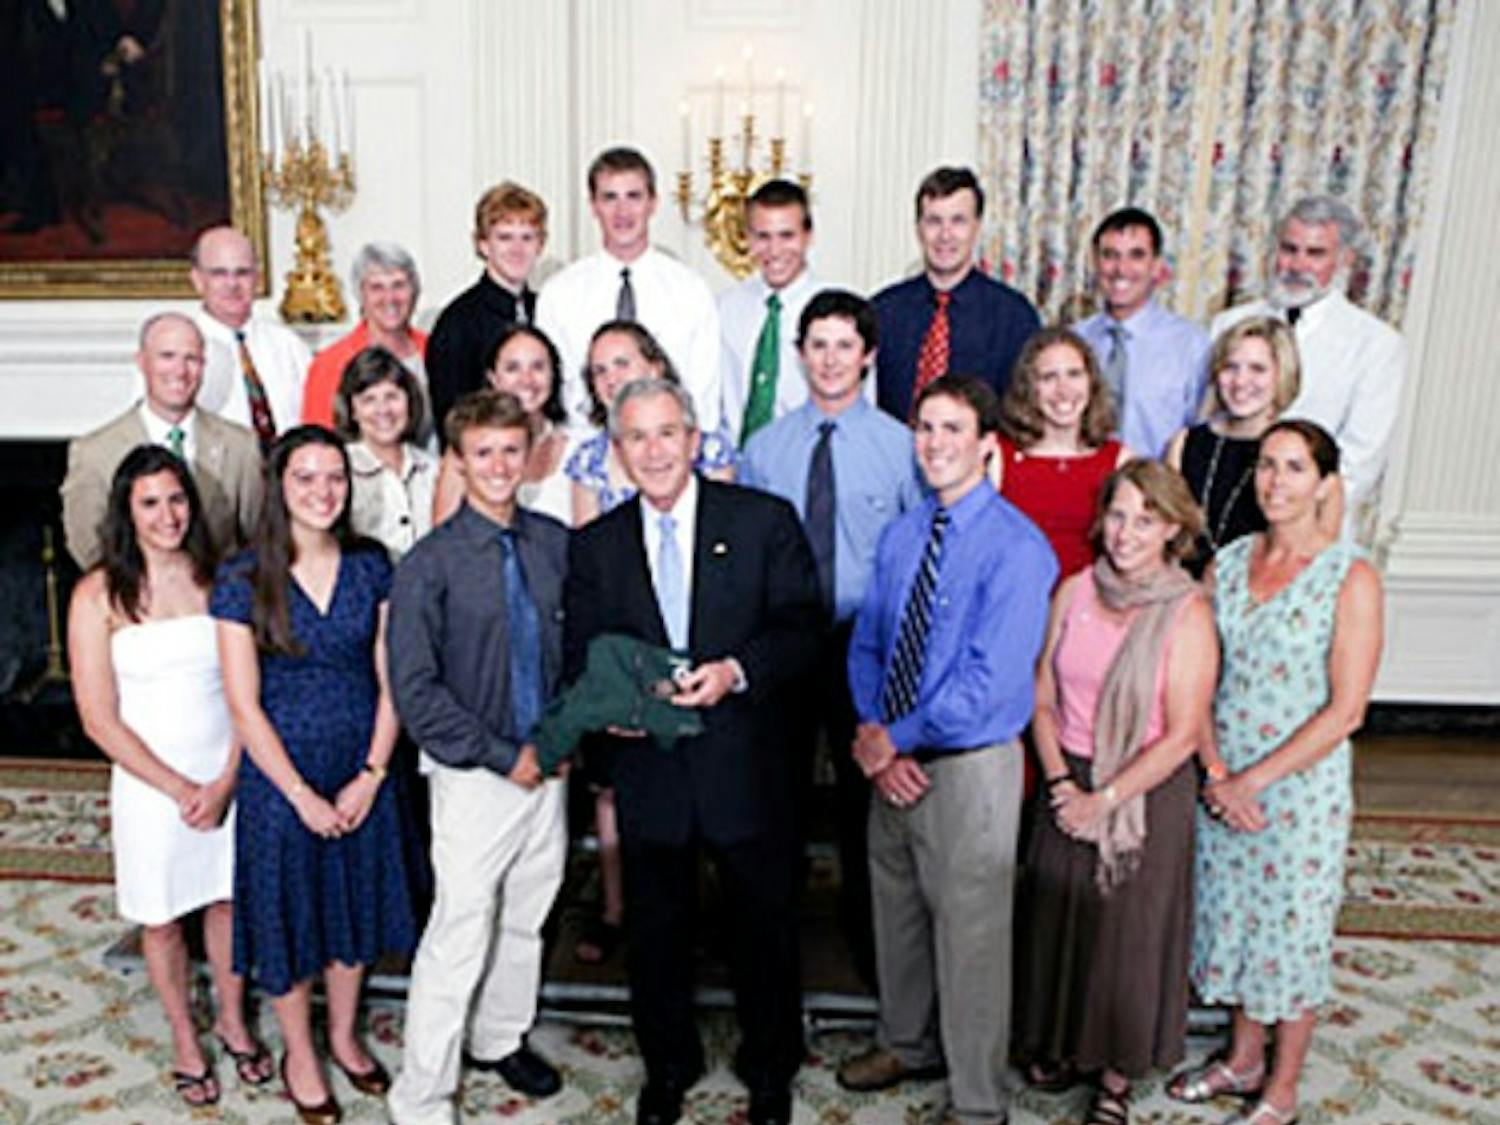 The Dartmouth ski team poses and presents a gift to President George W. Bush during Champions' Day at the White House on Monday.